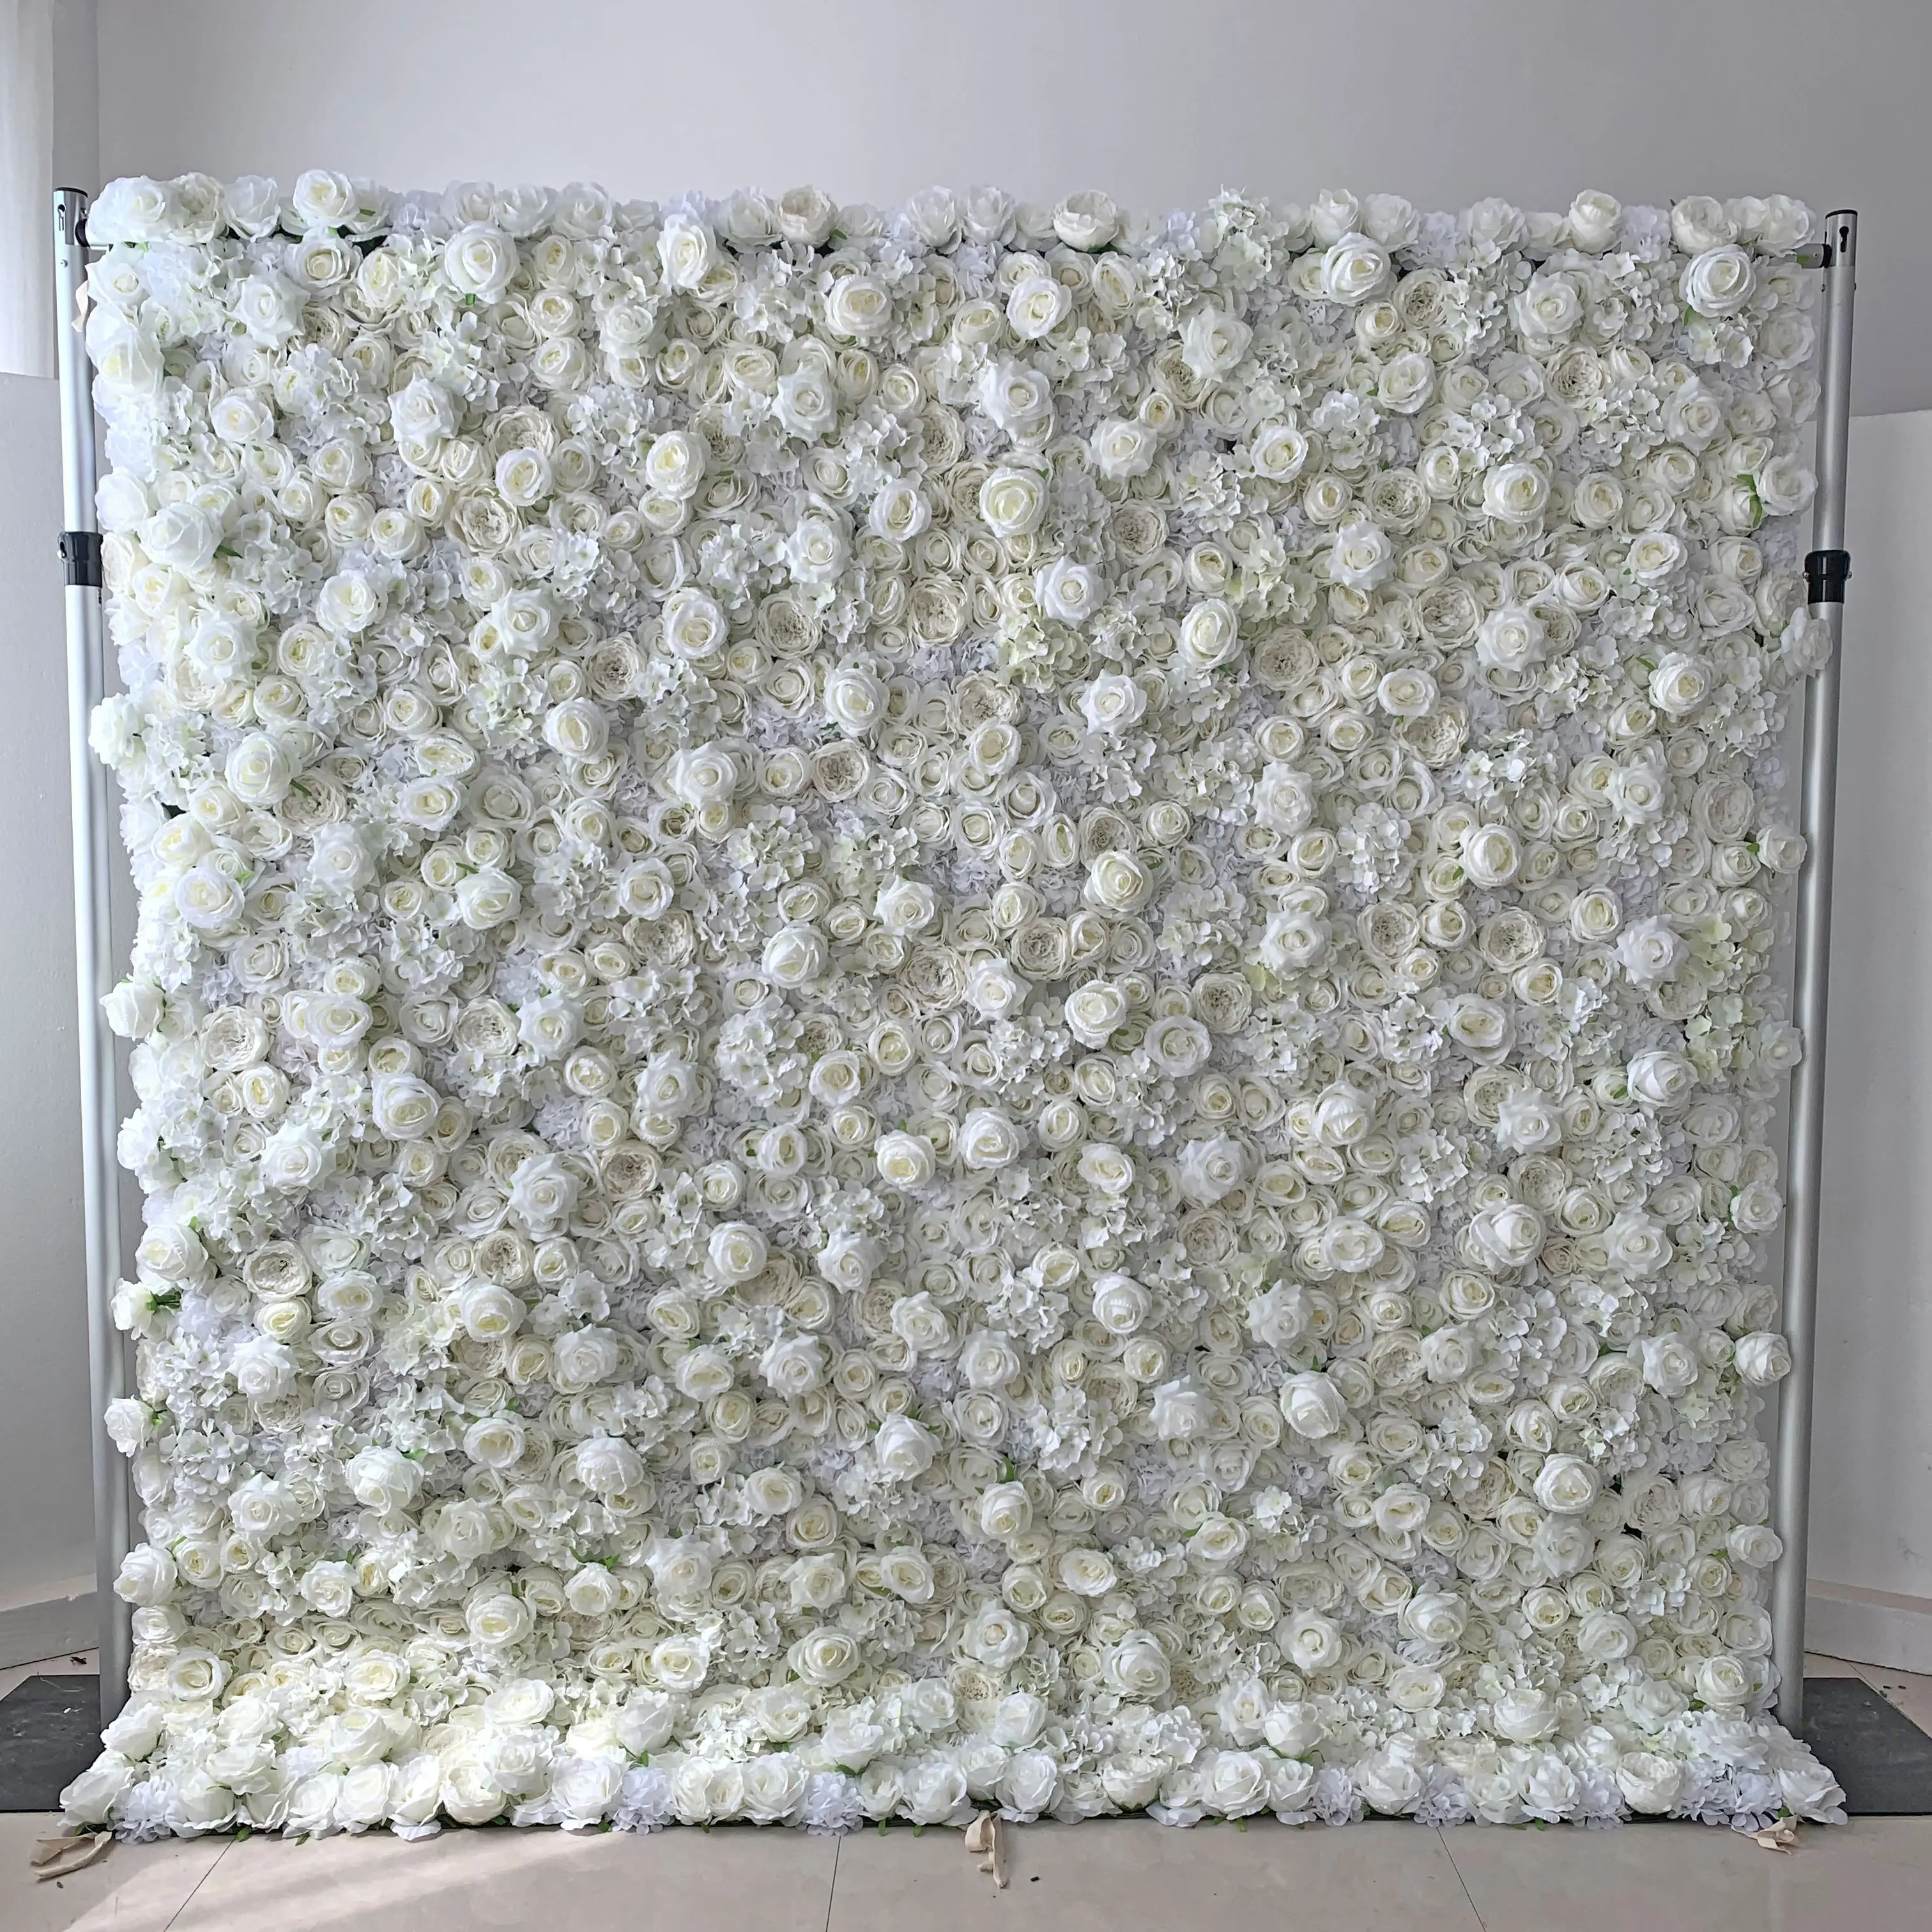 Wedding Floral Backdrop Artificial Roll Up Wall Decoration Backdrop Curtain White Flower Wall For Wedding Event Party